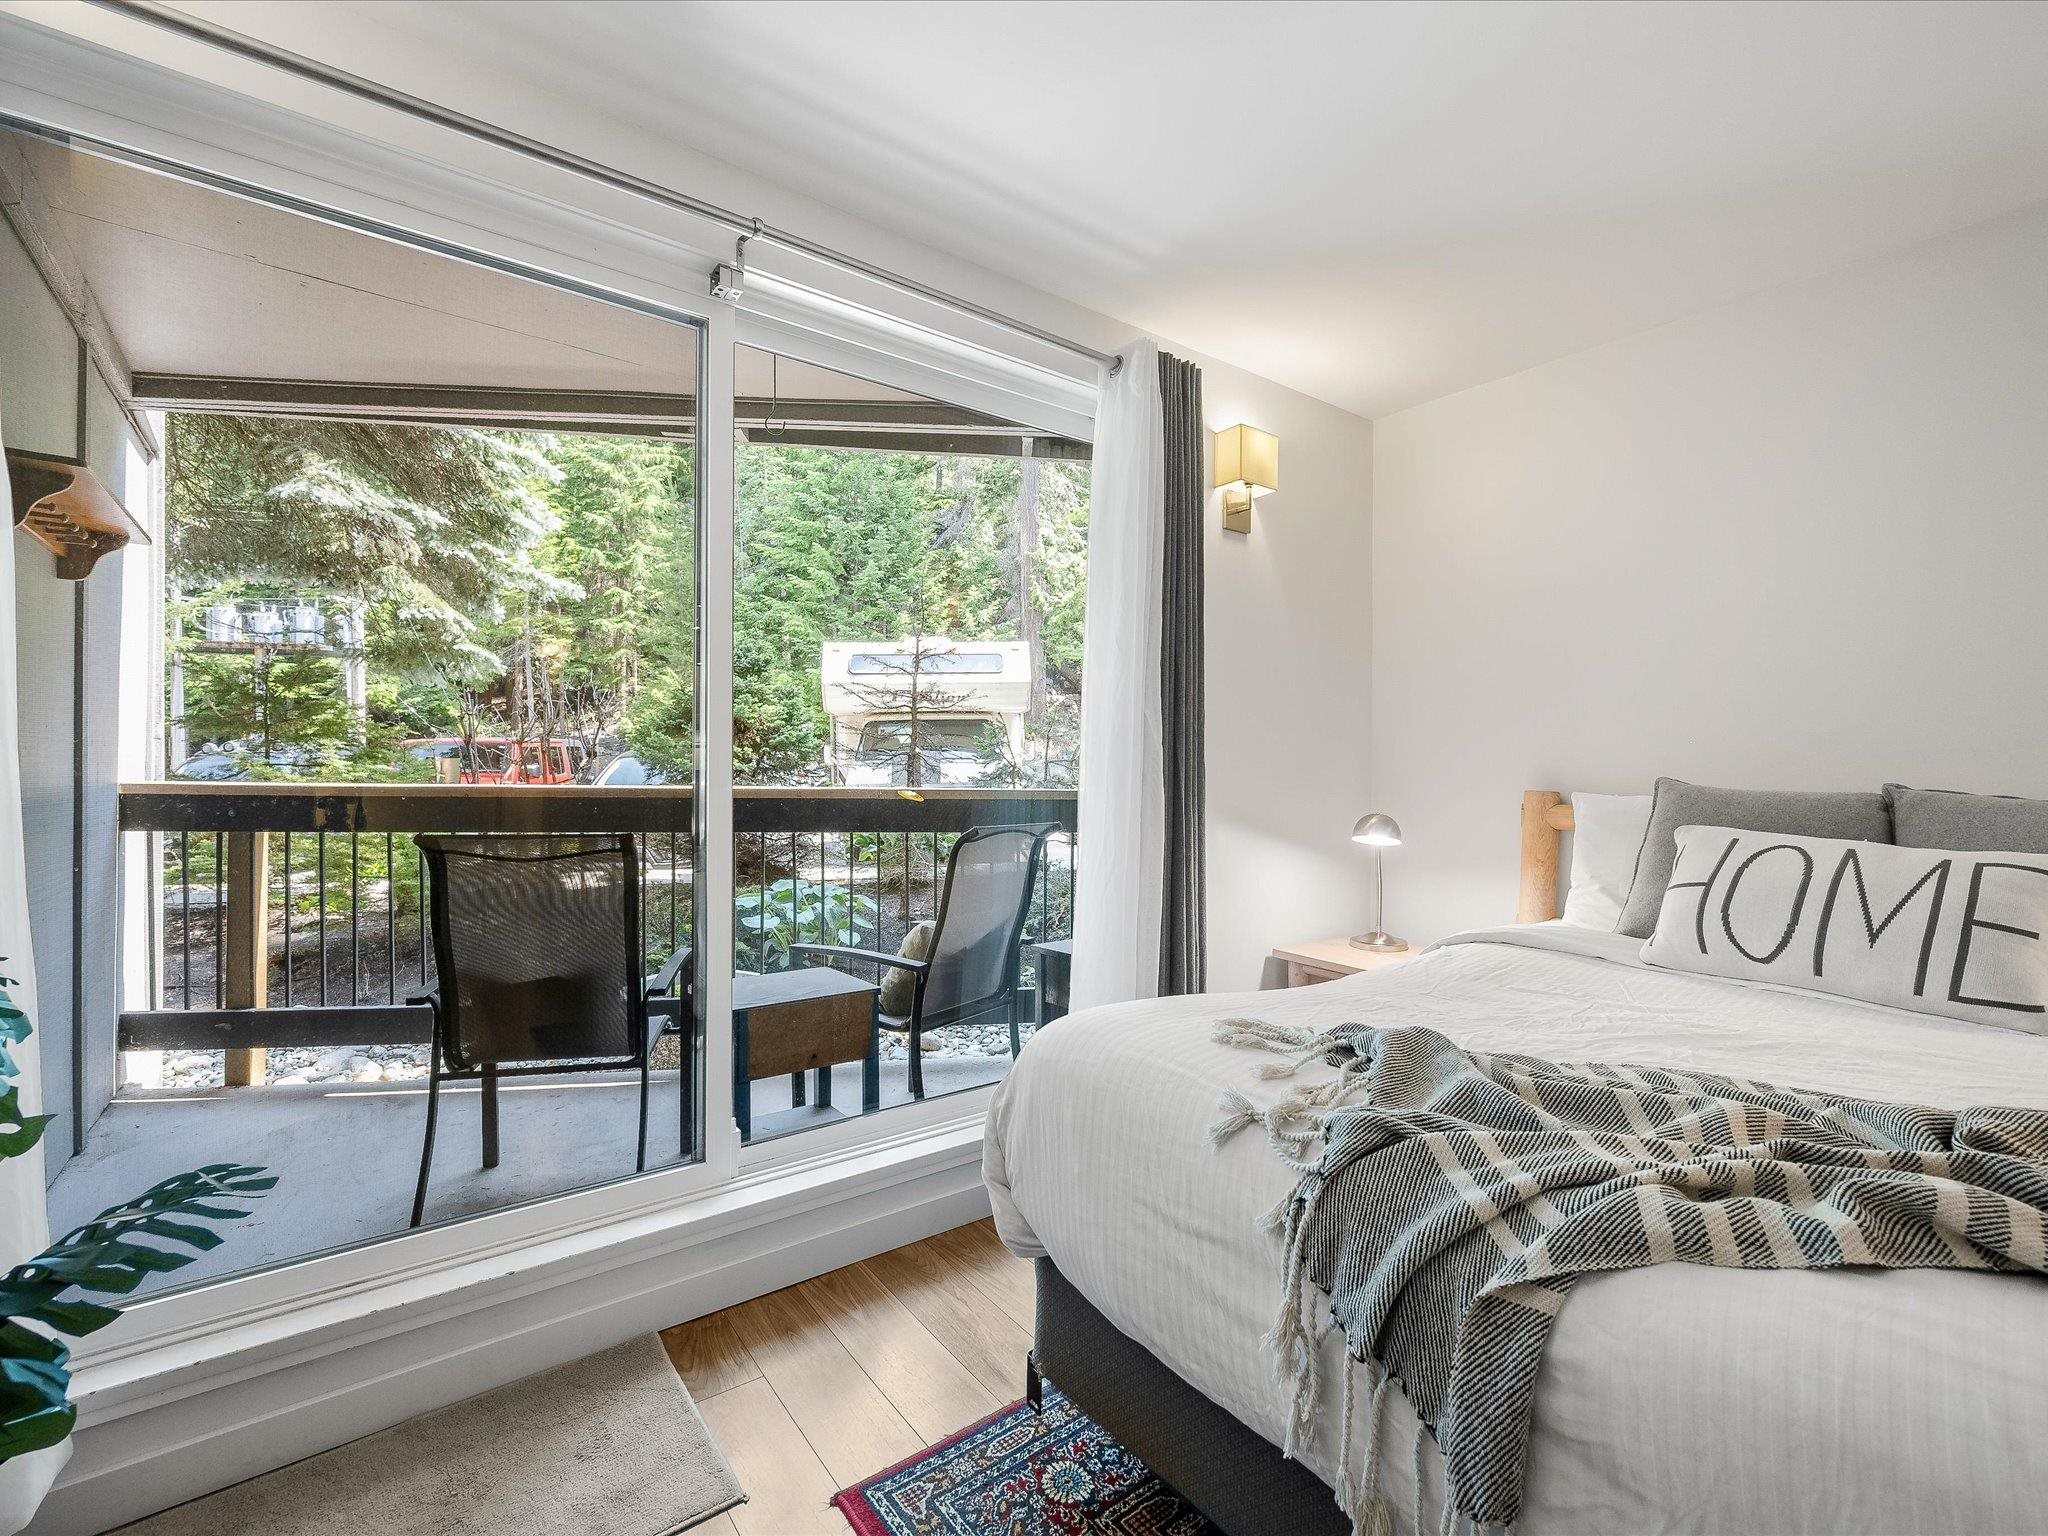 Listing image of 103 2109 WHISTLER ROAD